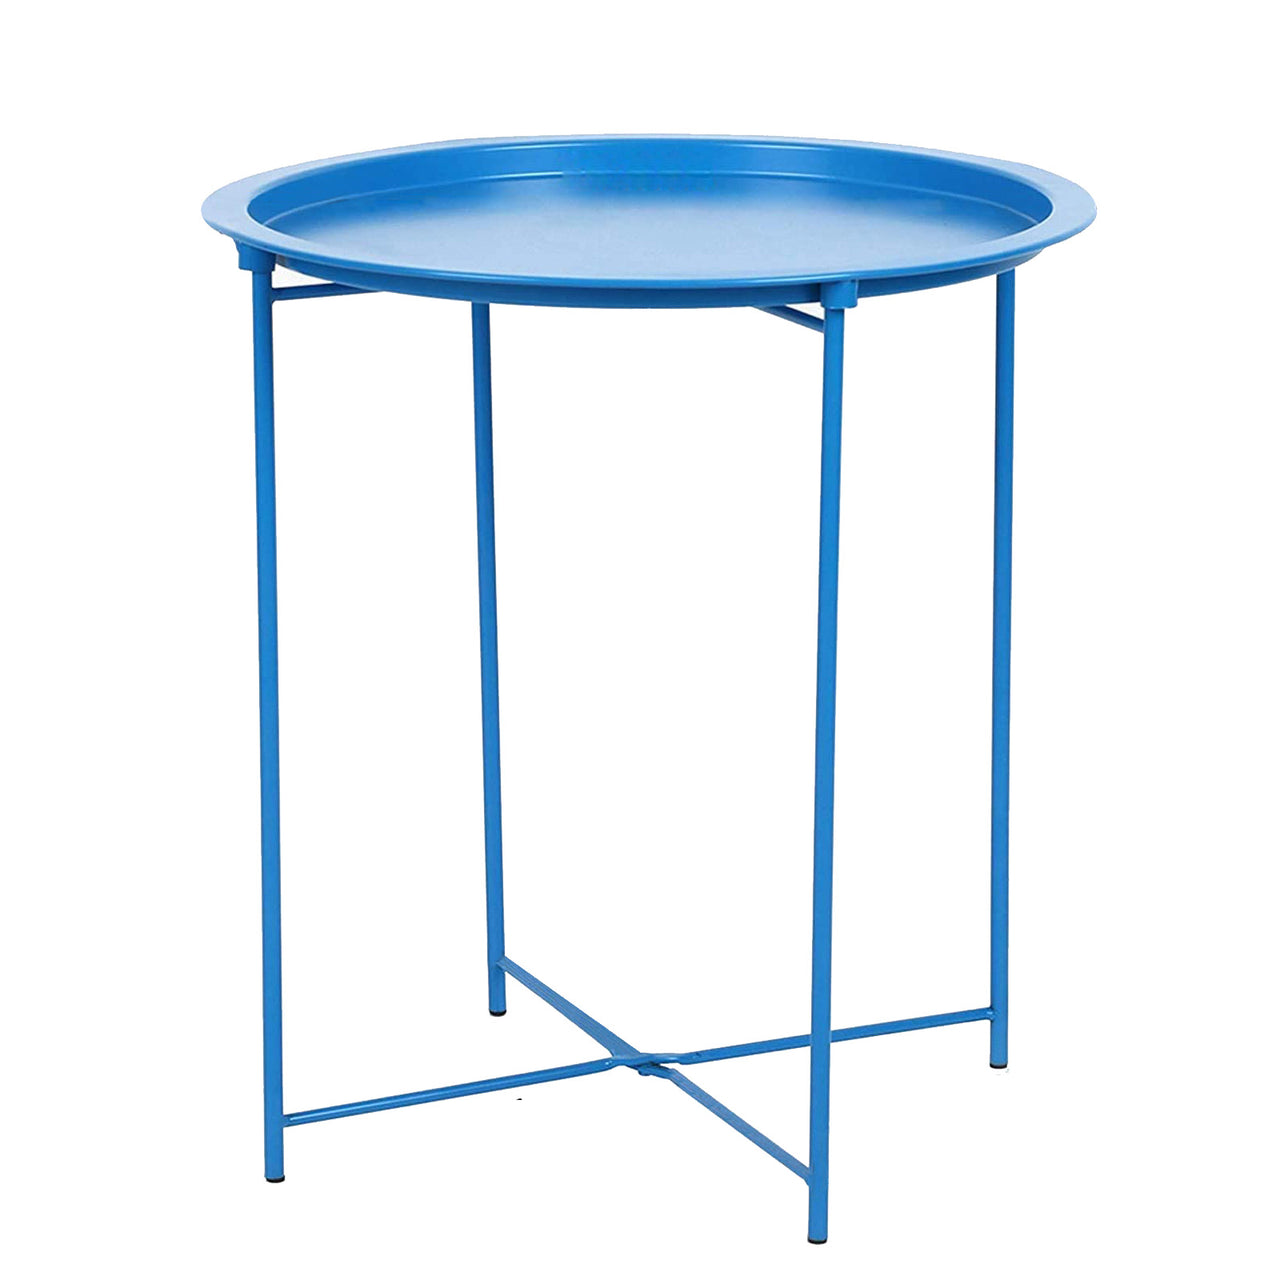 Folding Tray Metal Side Table, Sofa Table Small Round End Tables, Anti-Rust and Waterproof Outdoor or Indoor Snack Table, Accent Coffee Table